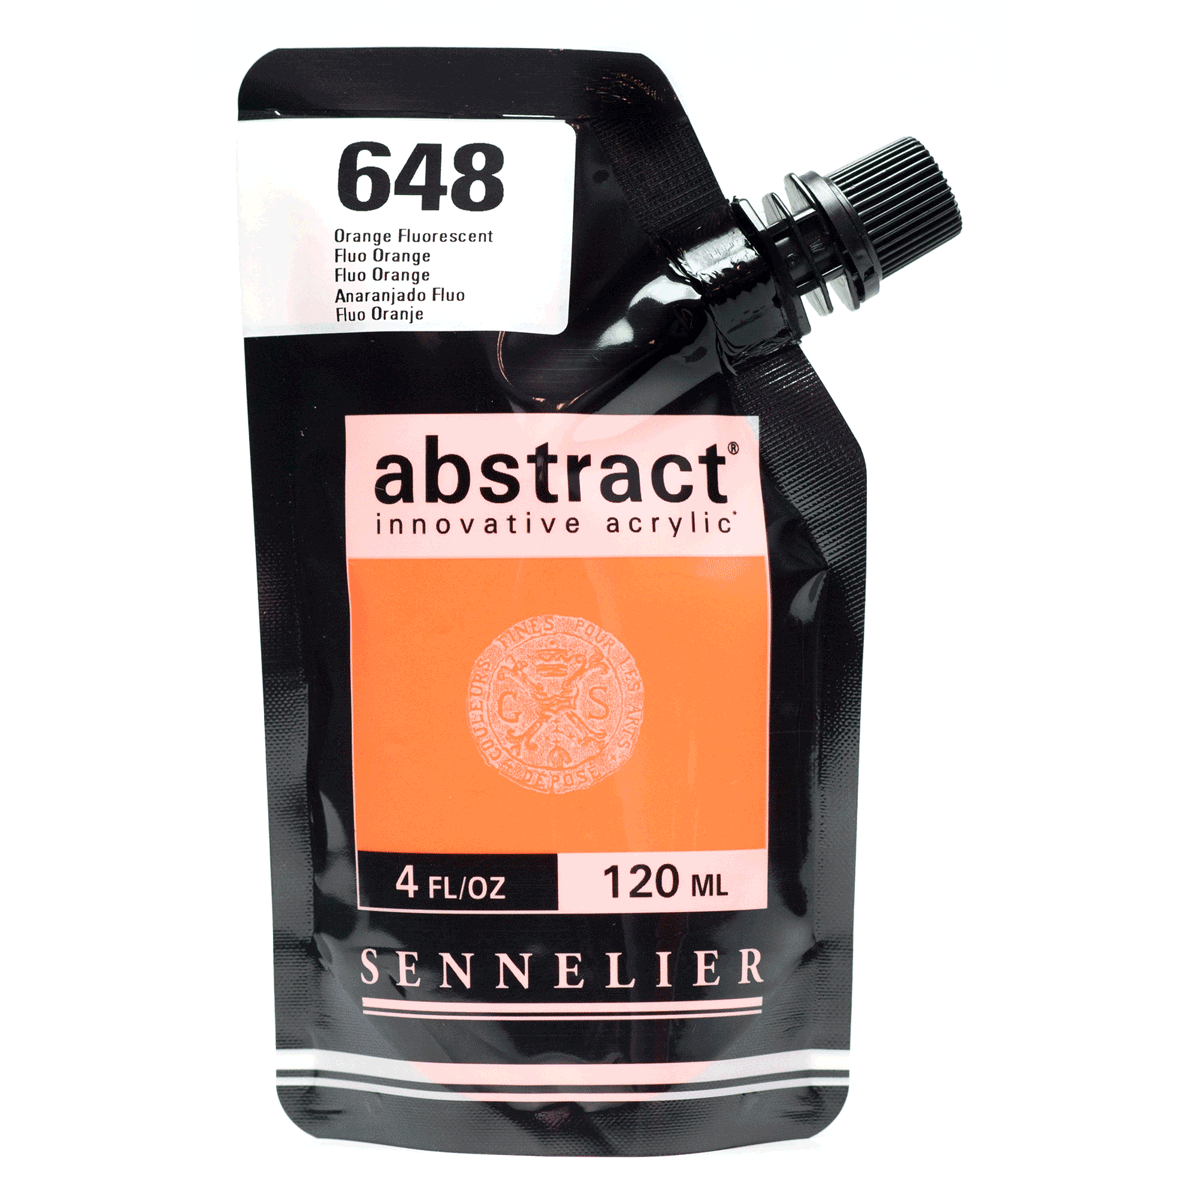 Abstract Acrylic Pouch - 648 Fluorescent Orange 120ml